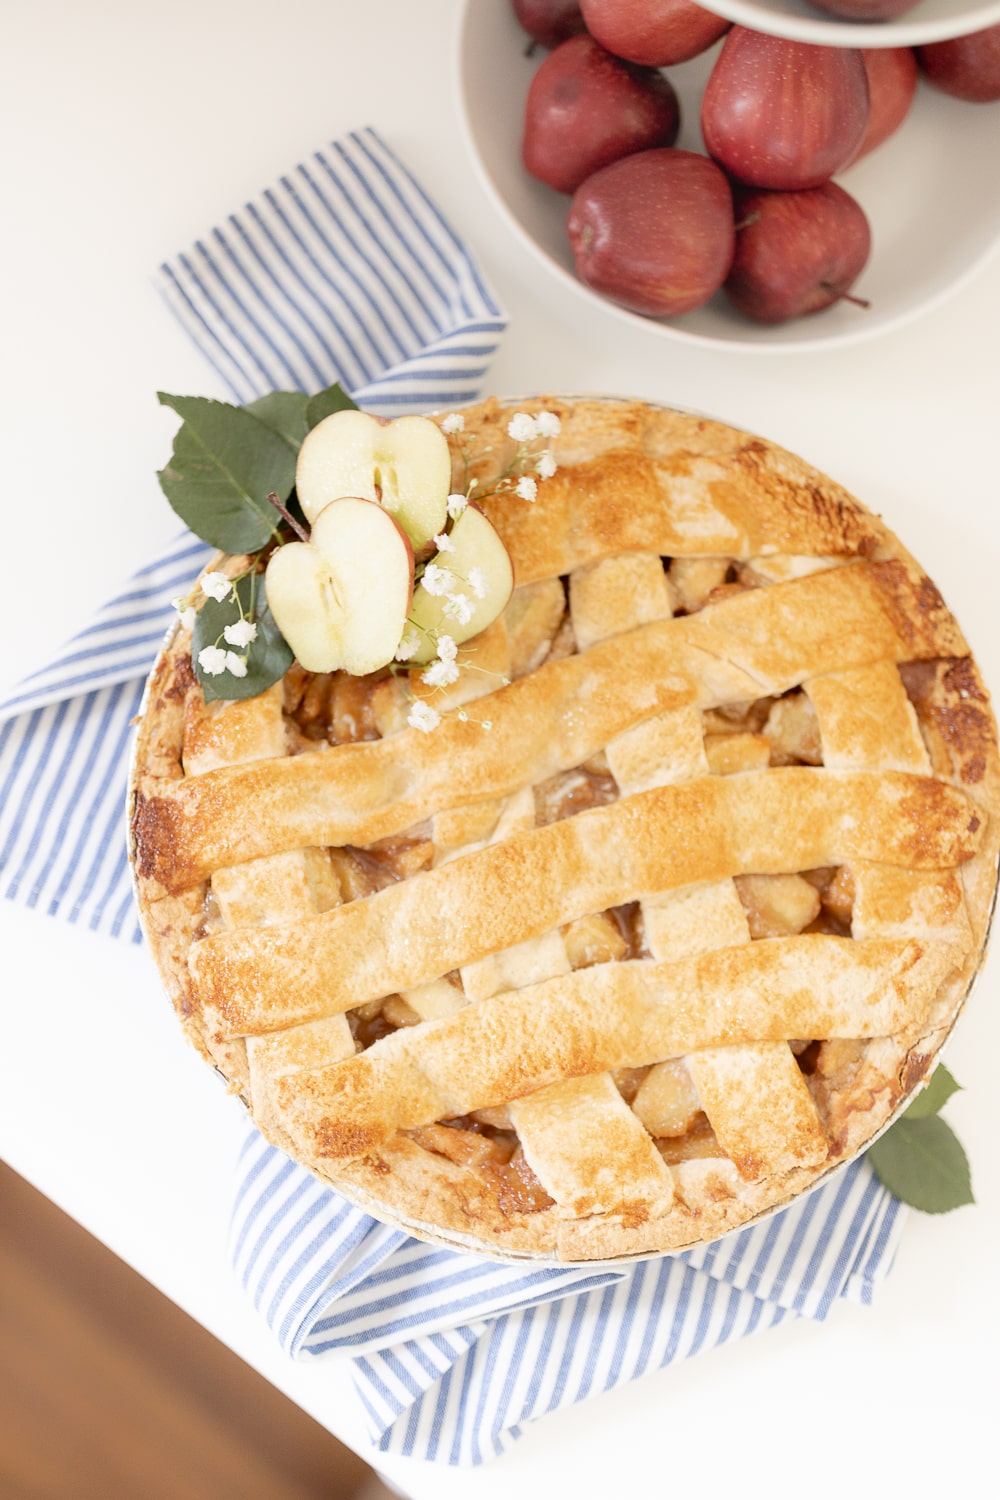 Hy-Vee apple pie prepared and decorated by blogger Stephanie Ziajka on Diary of a Debutante